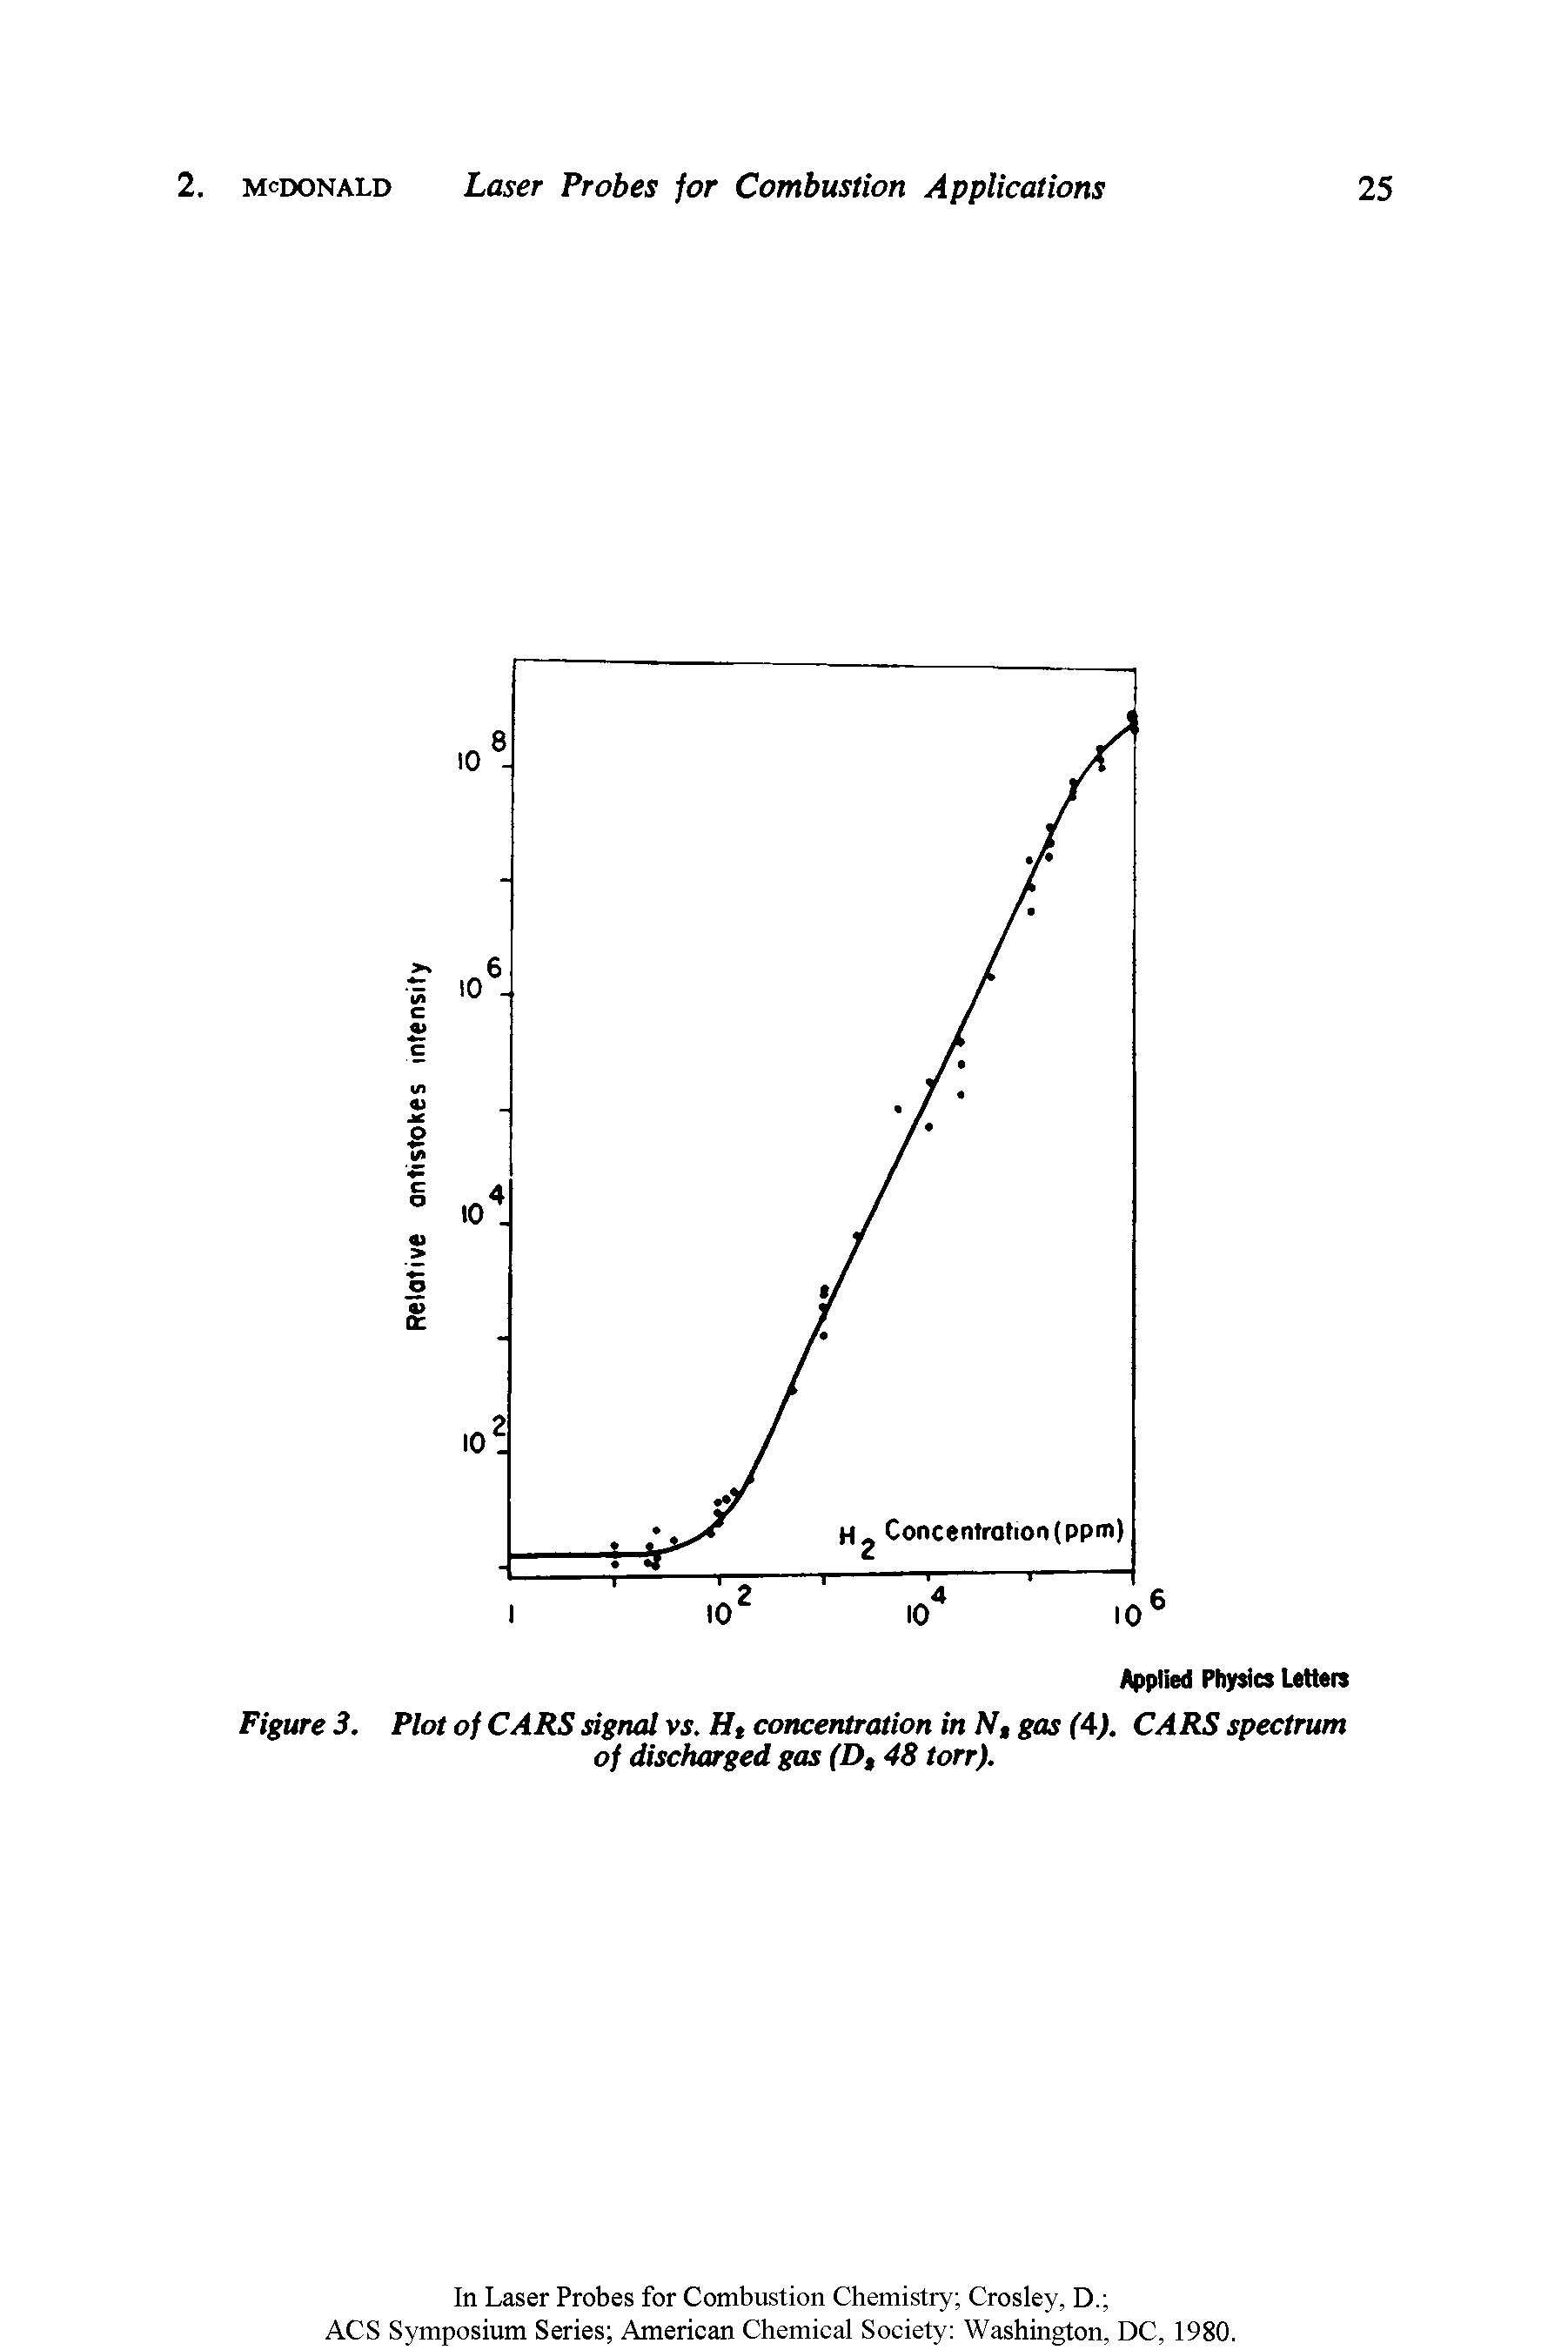 Figure 3. Plot of CAPS signal vs. Ht concentration in N, gas (4). CARS spectrum of discharged gas (D, 48 torr).